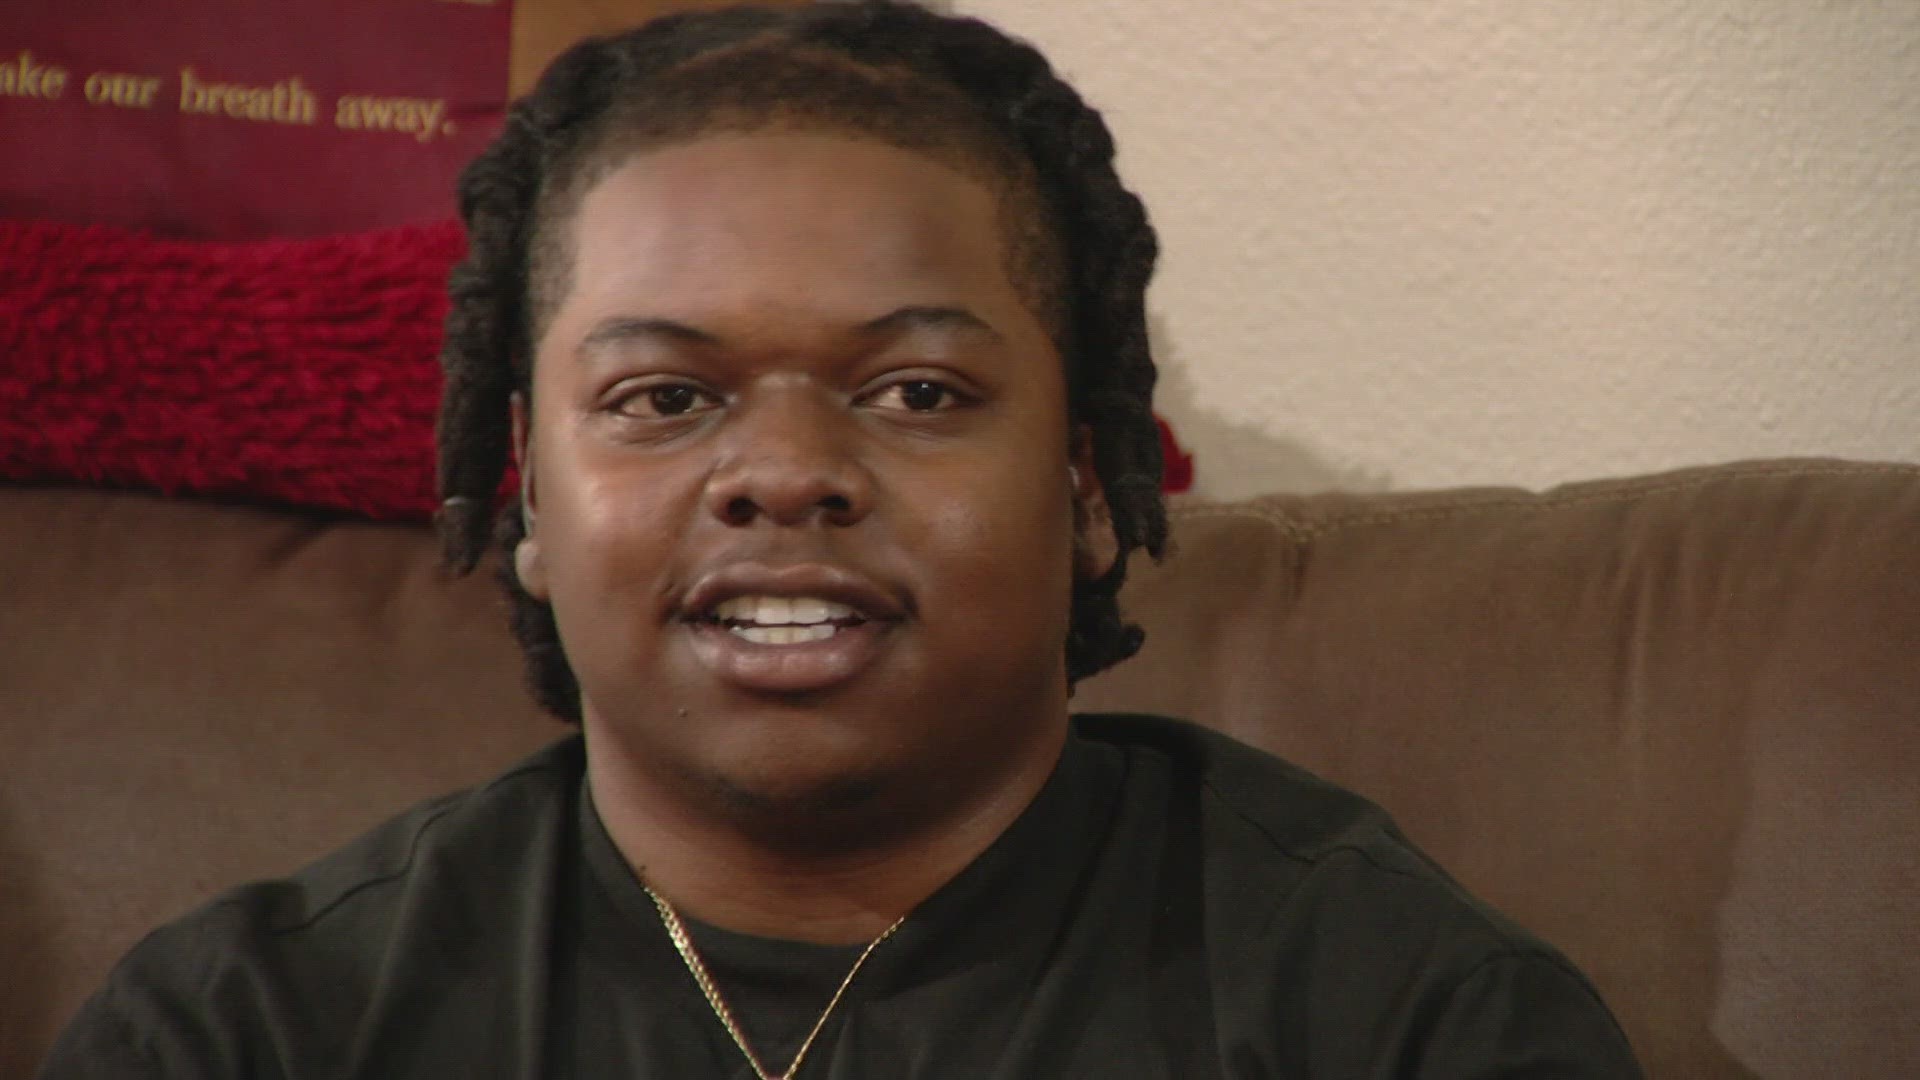 Stephan Long tells 9NEWS he was being attacked when he shot two people on Interstate 25 in June.